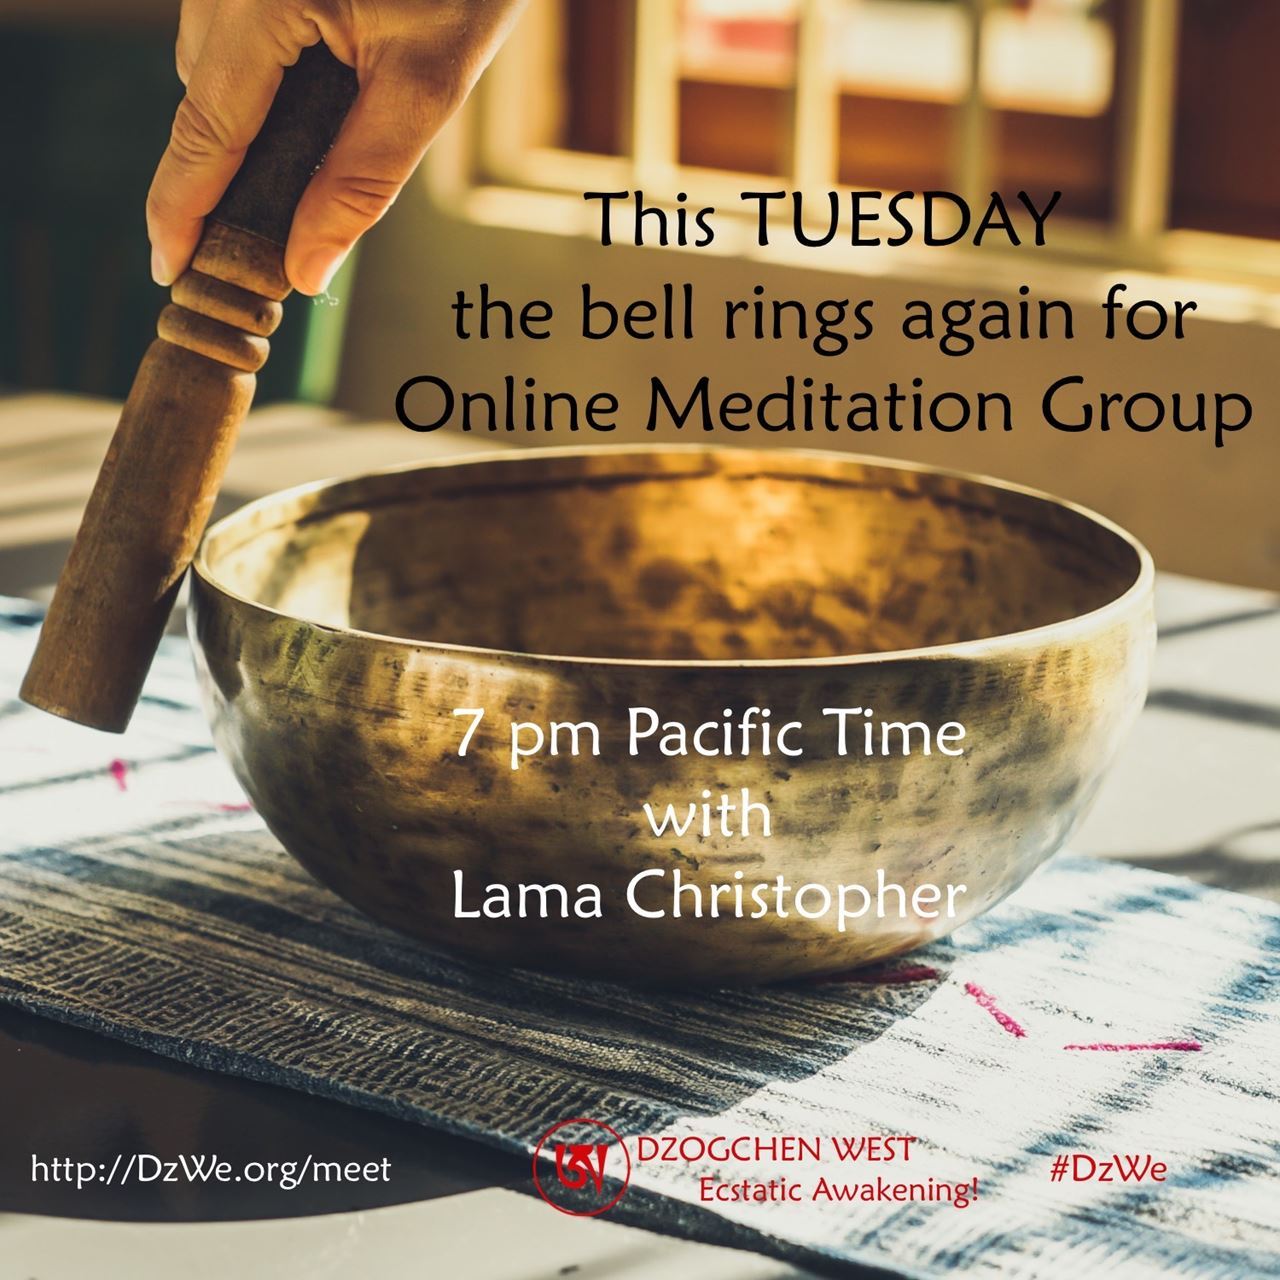 Online Meditation Group this TUESDAY